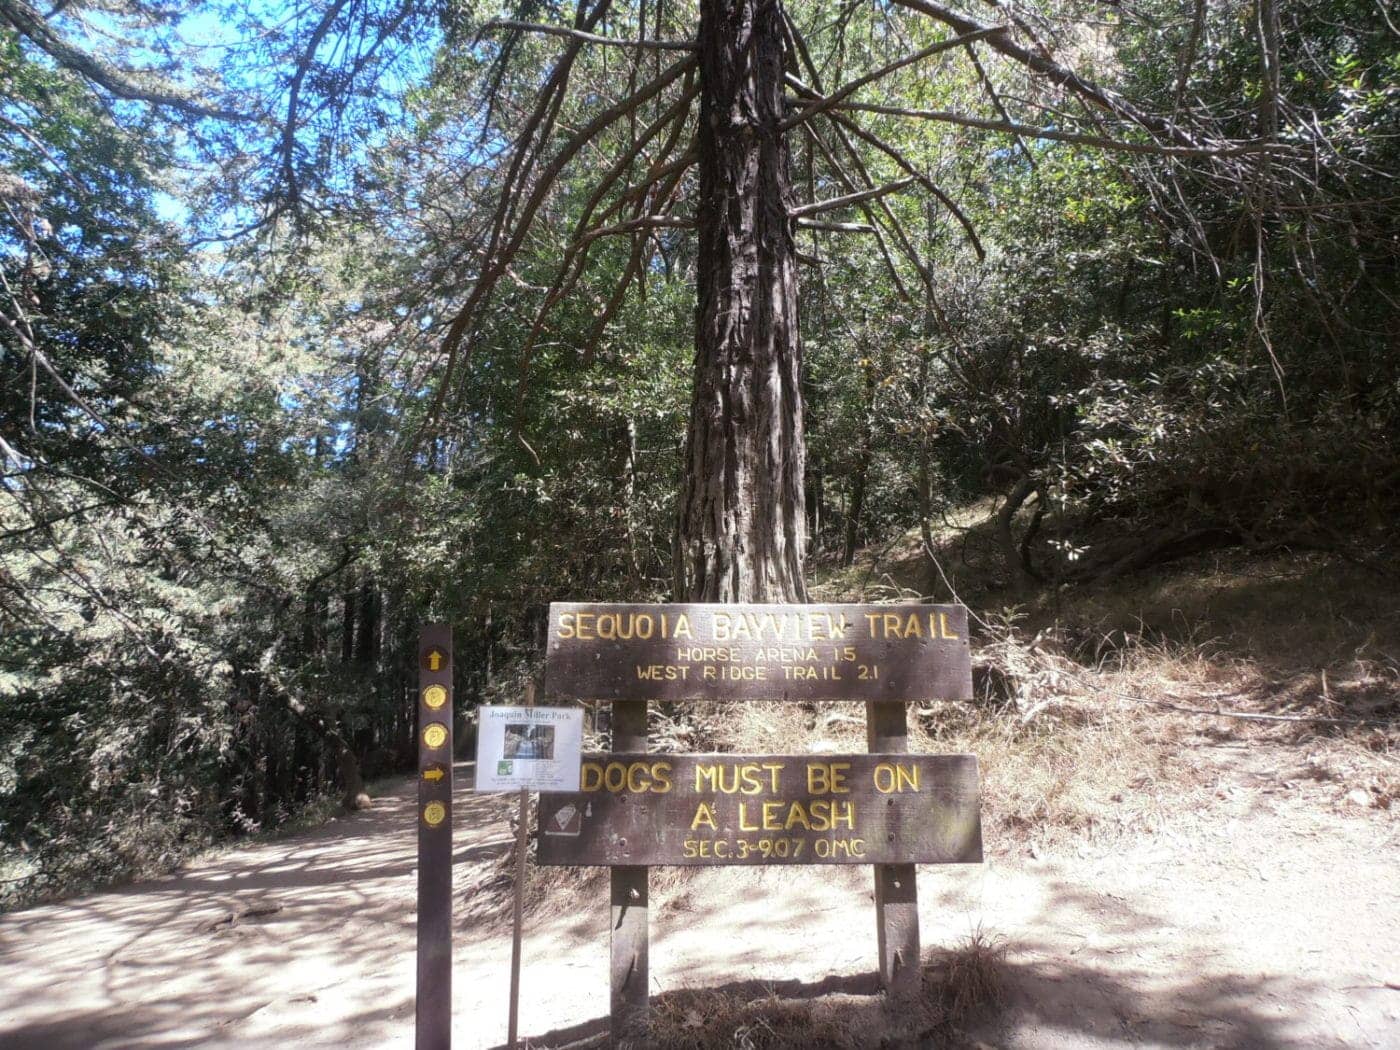 Trailhead-of-Redwoods-in-J.-Miller-Park-handed-over-to-Indigenous-People-by-Jahahara-2022-1400x1050, No mourning the criminal imperial(ist) monarchies!, Culture Currents 